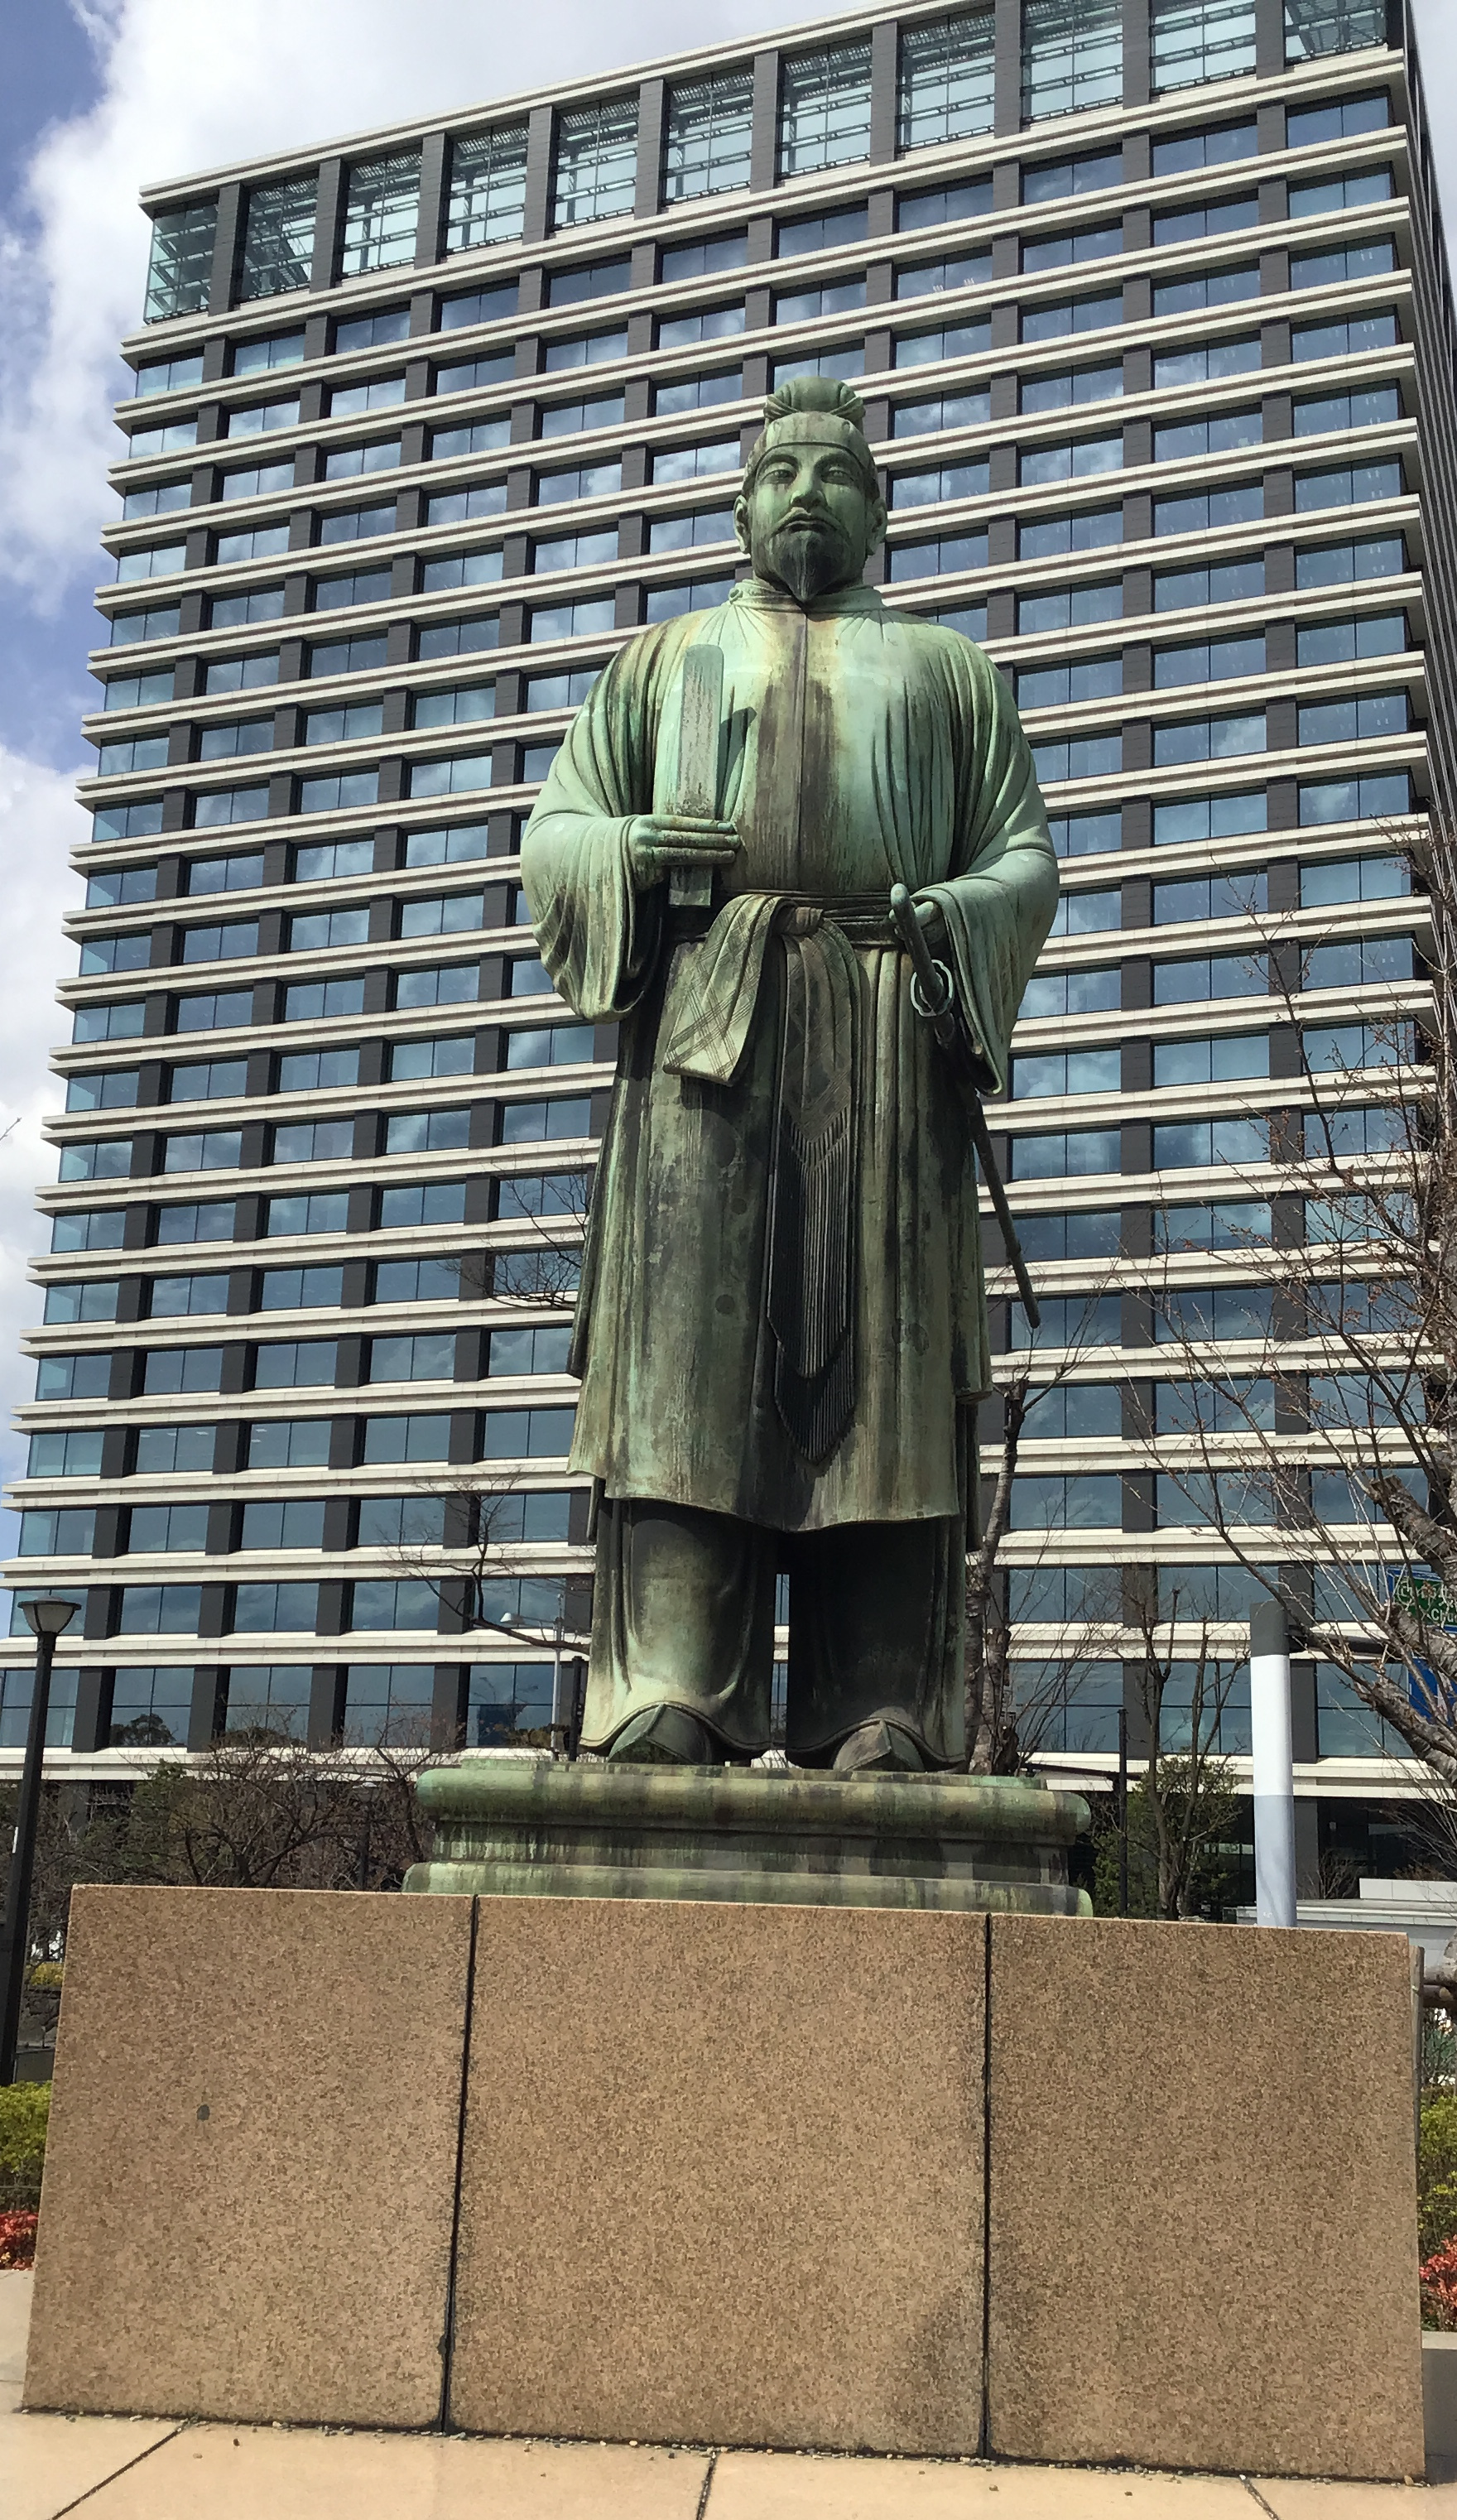 A statue near the imperial palace